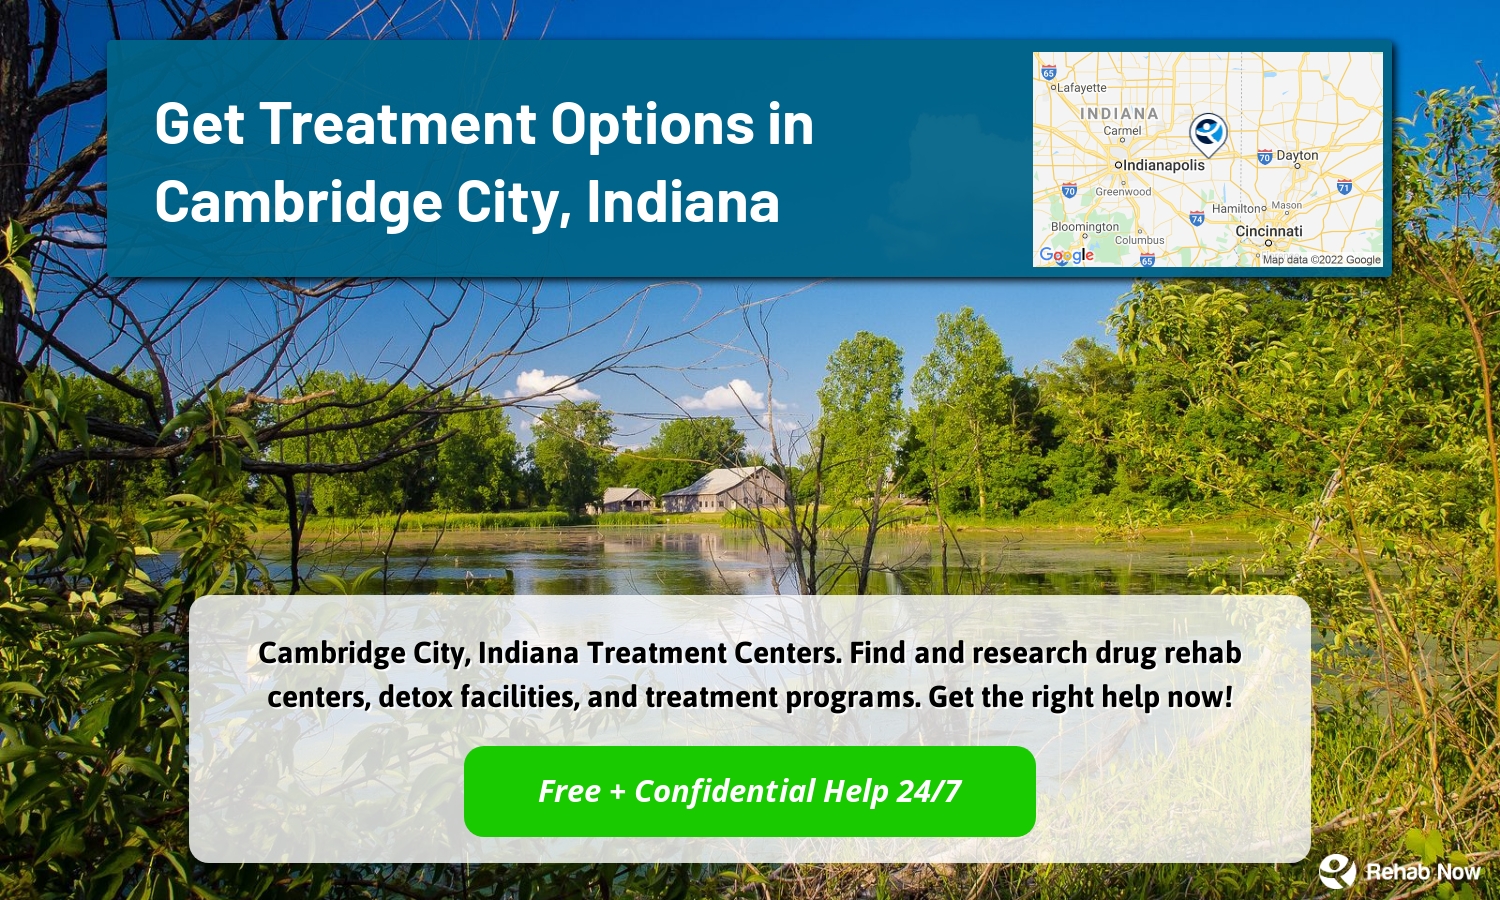 Cambridge City, Indiana Treatment Centers. Find and research drug rehab centers, detox facilities, and treatment programs. Get the right help now!